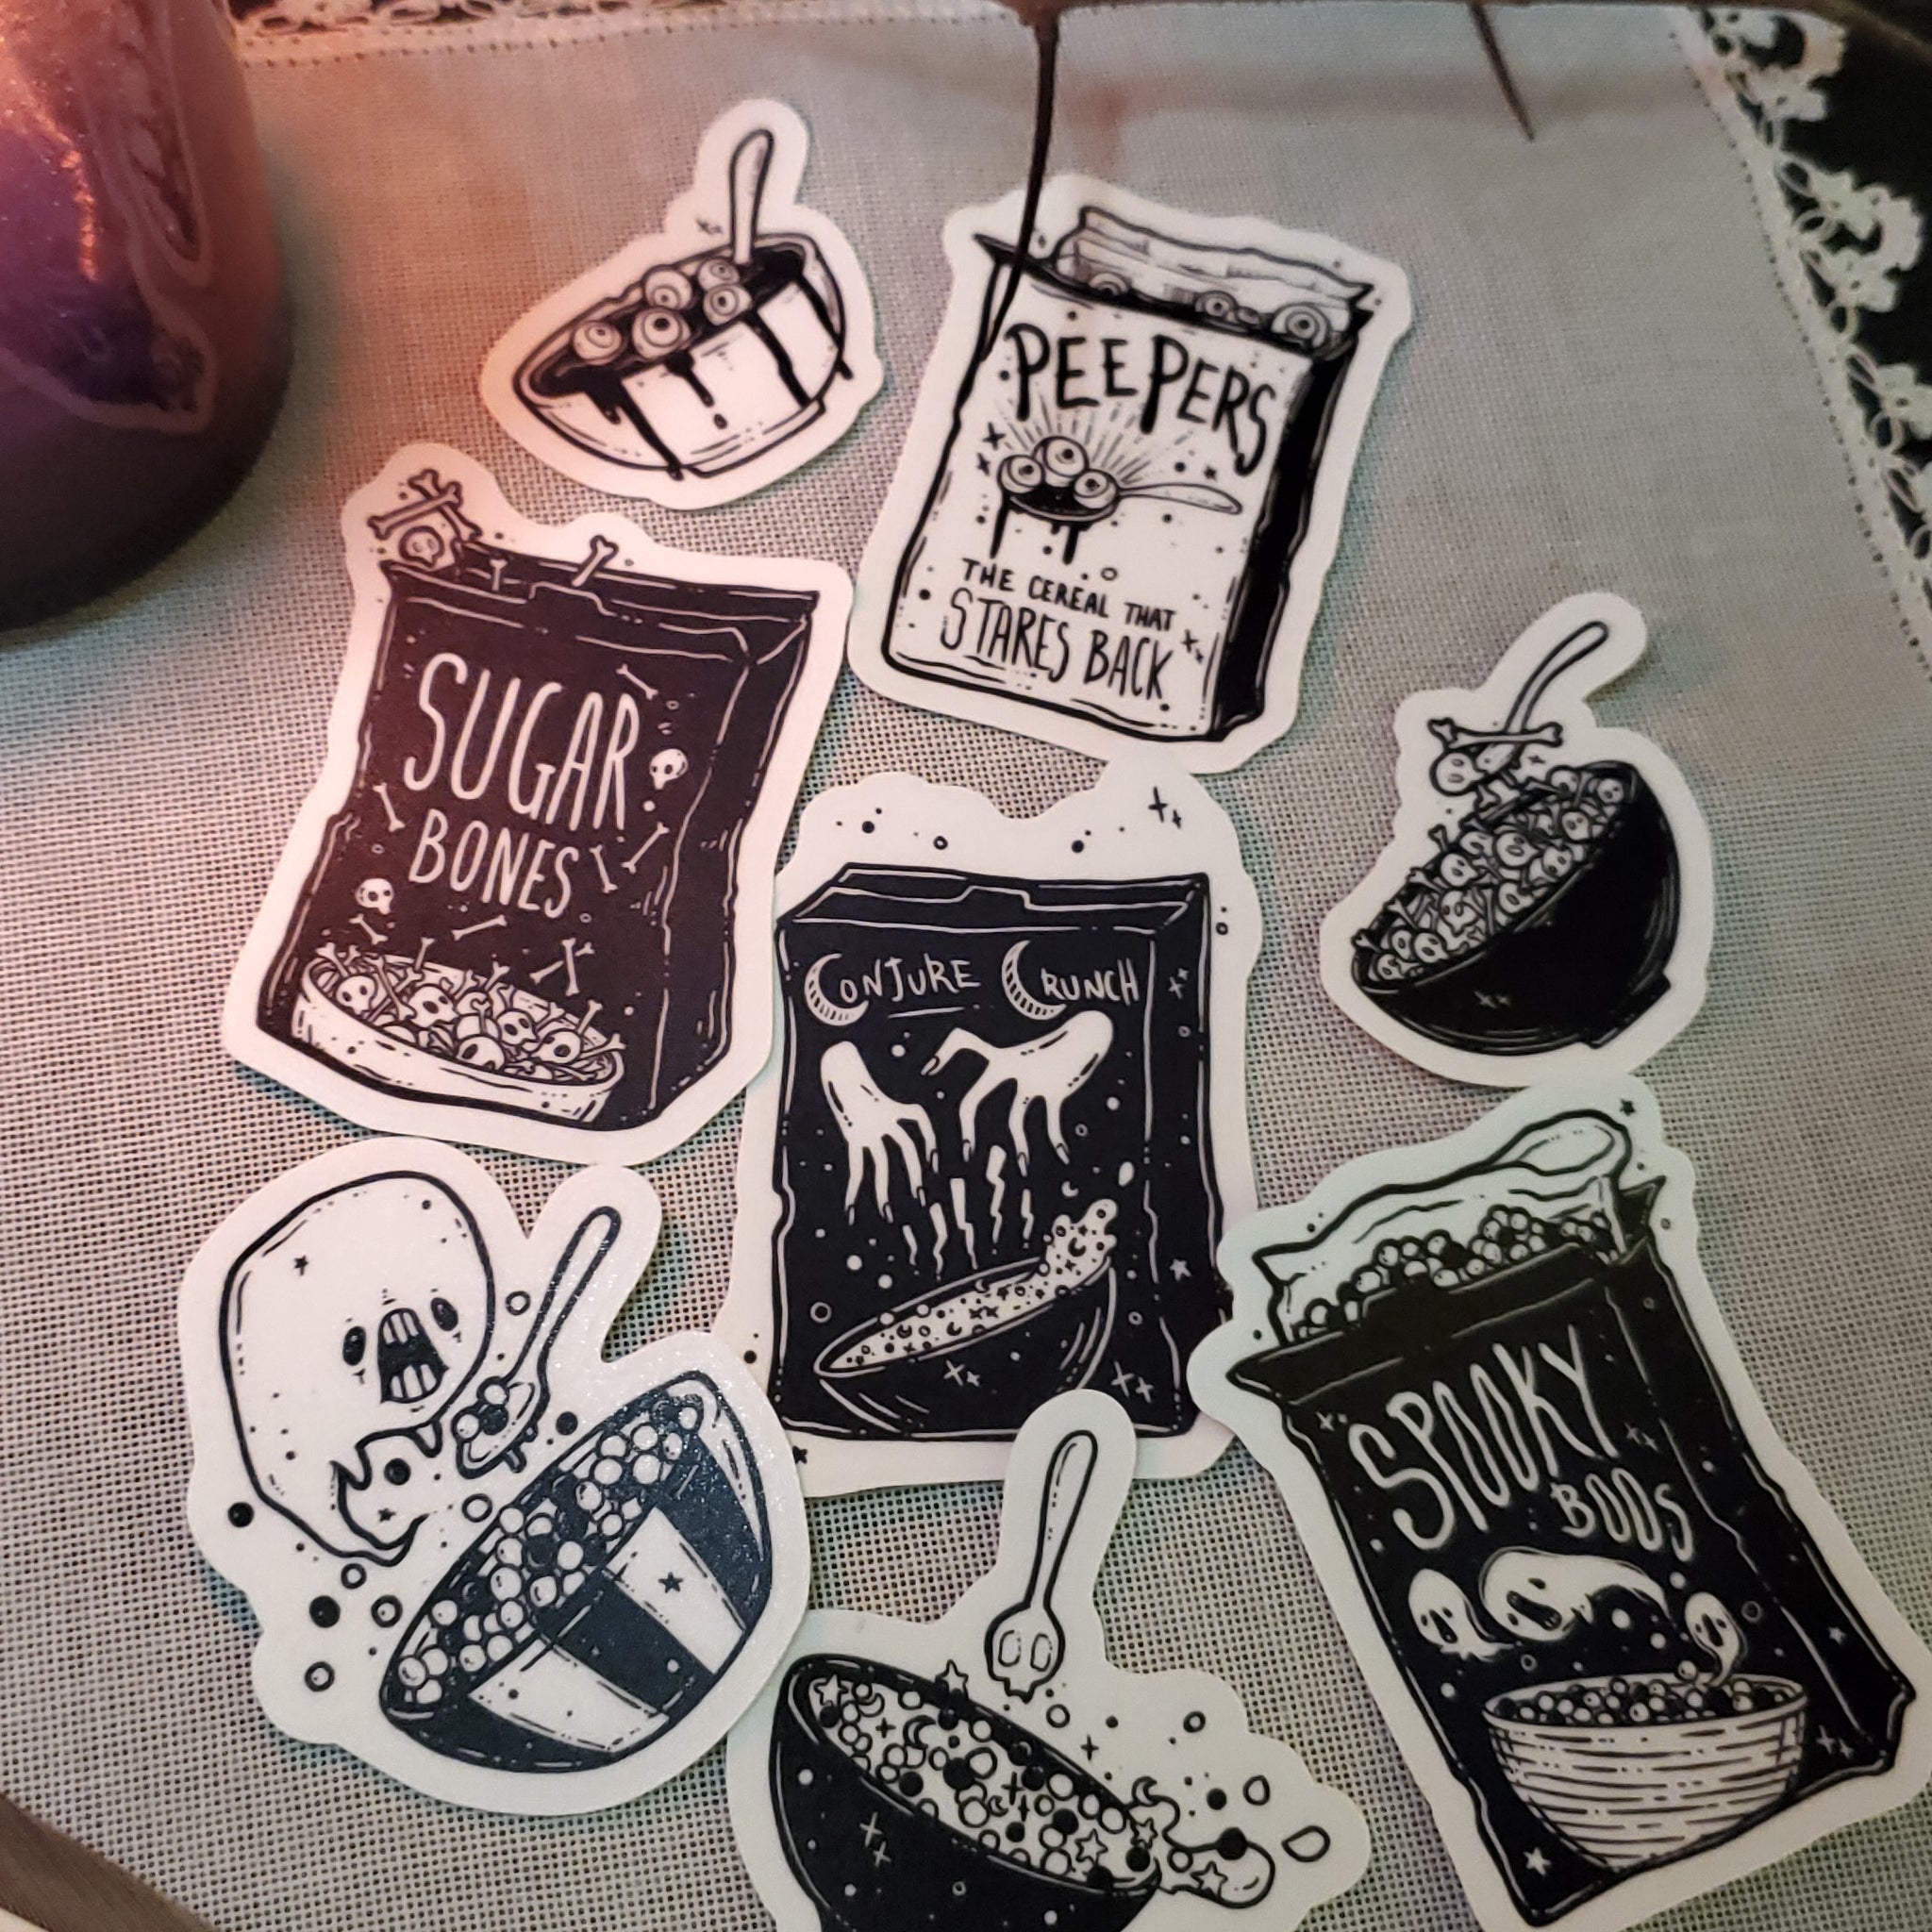 Cereal Killer small Sticker Pack